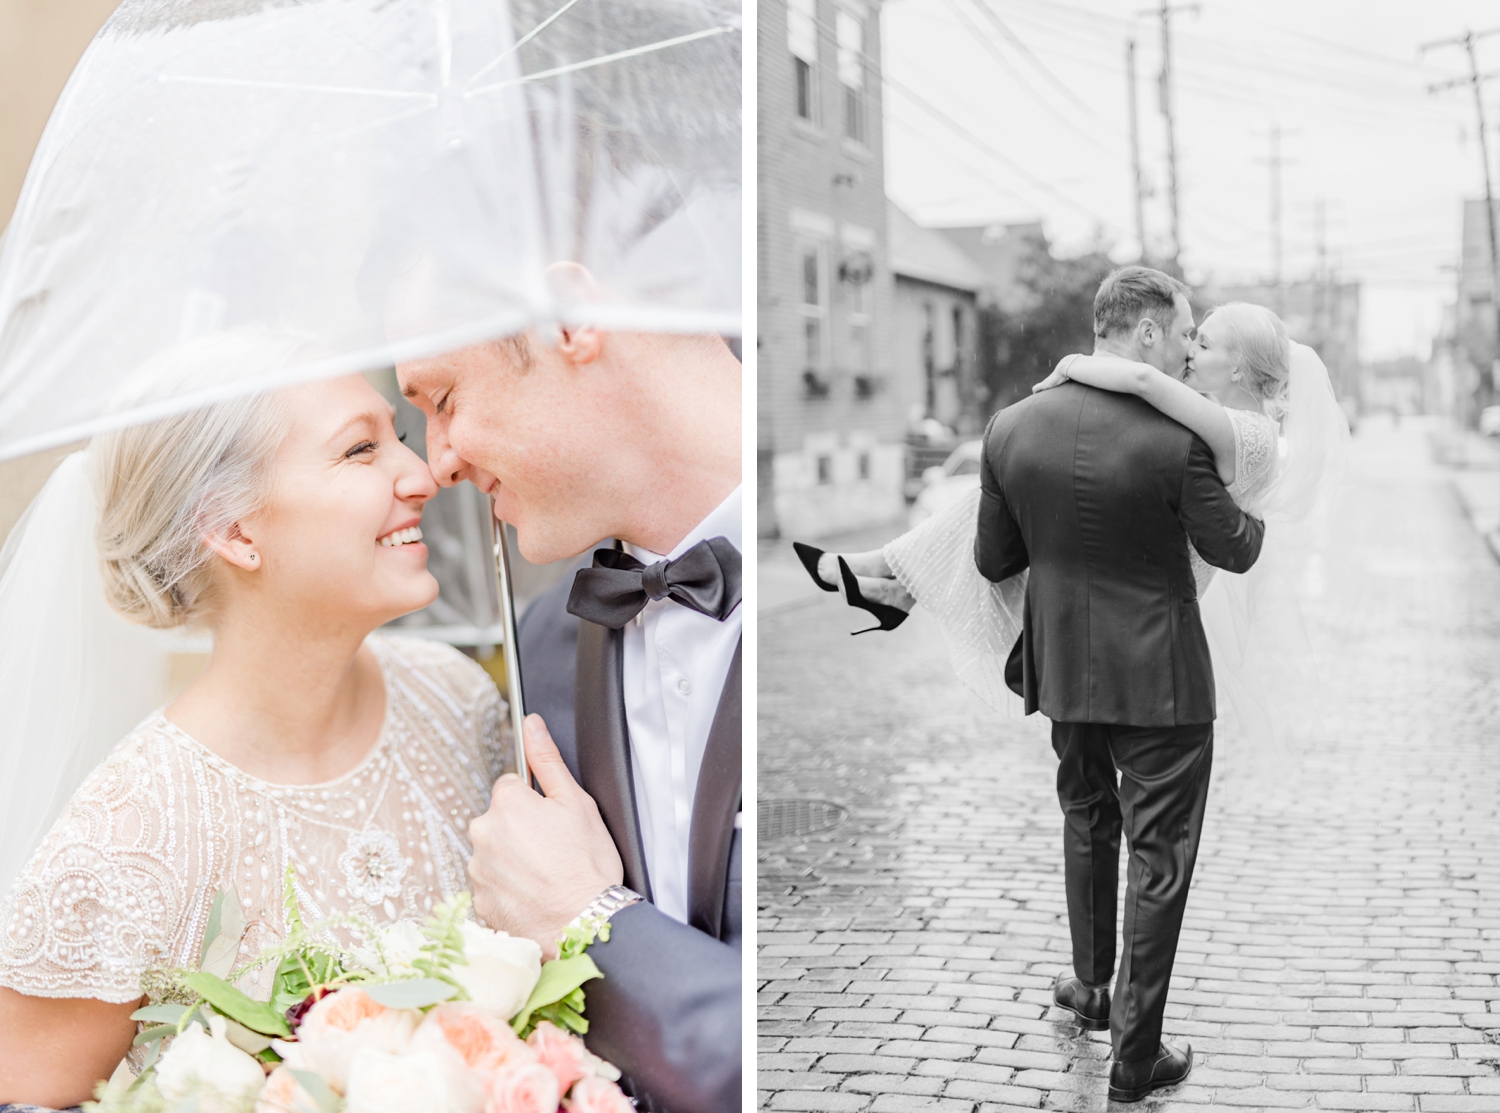 wedding-day-portraits-in-the-rain-with-an-umbrella